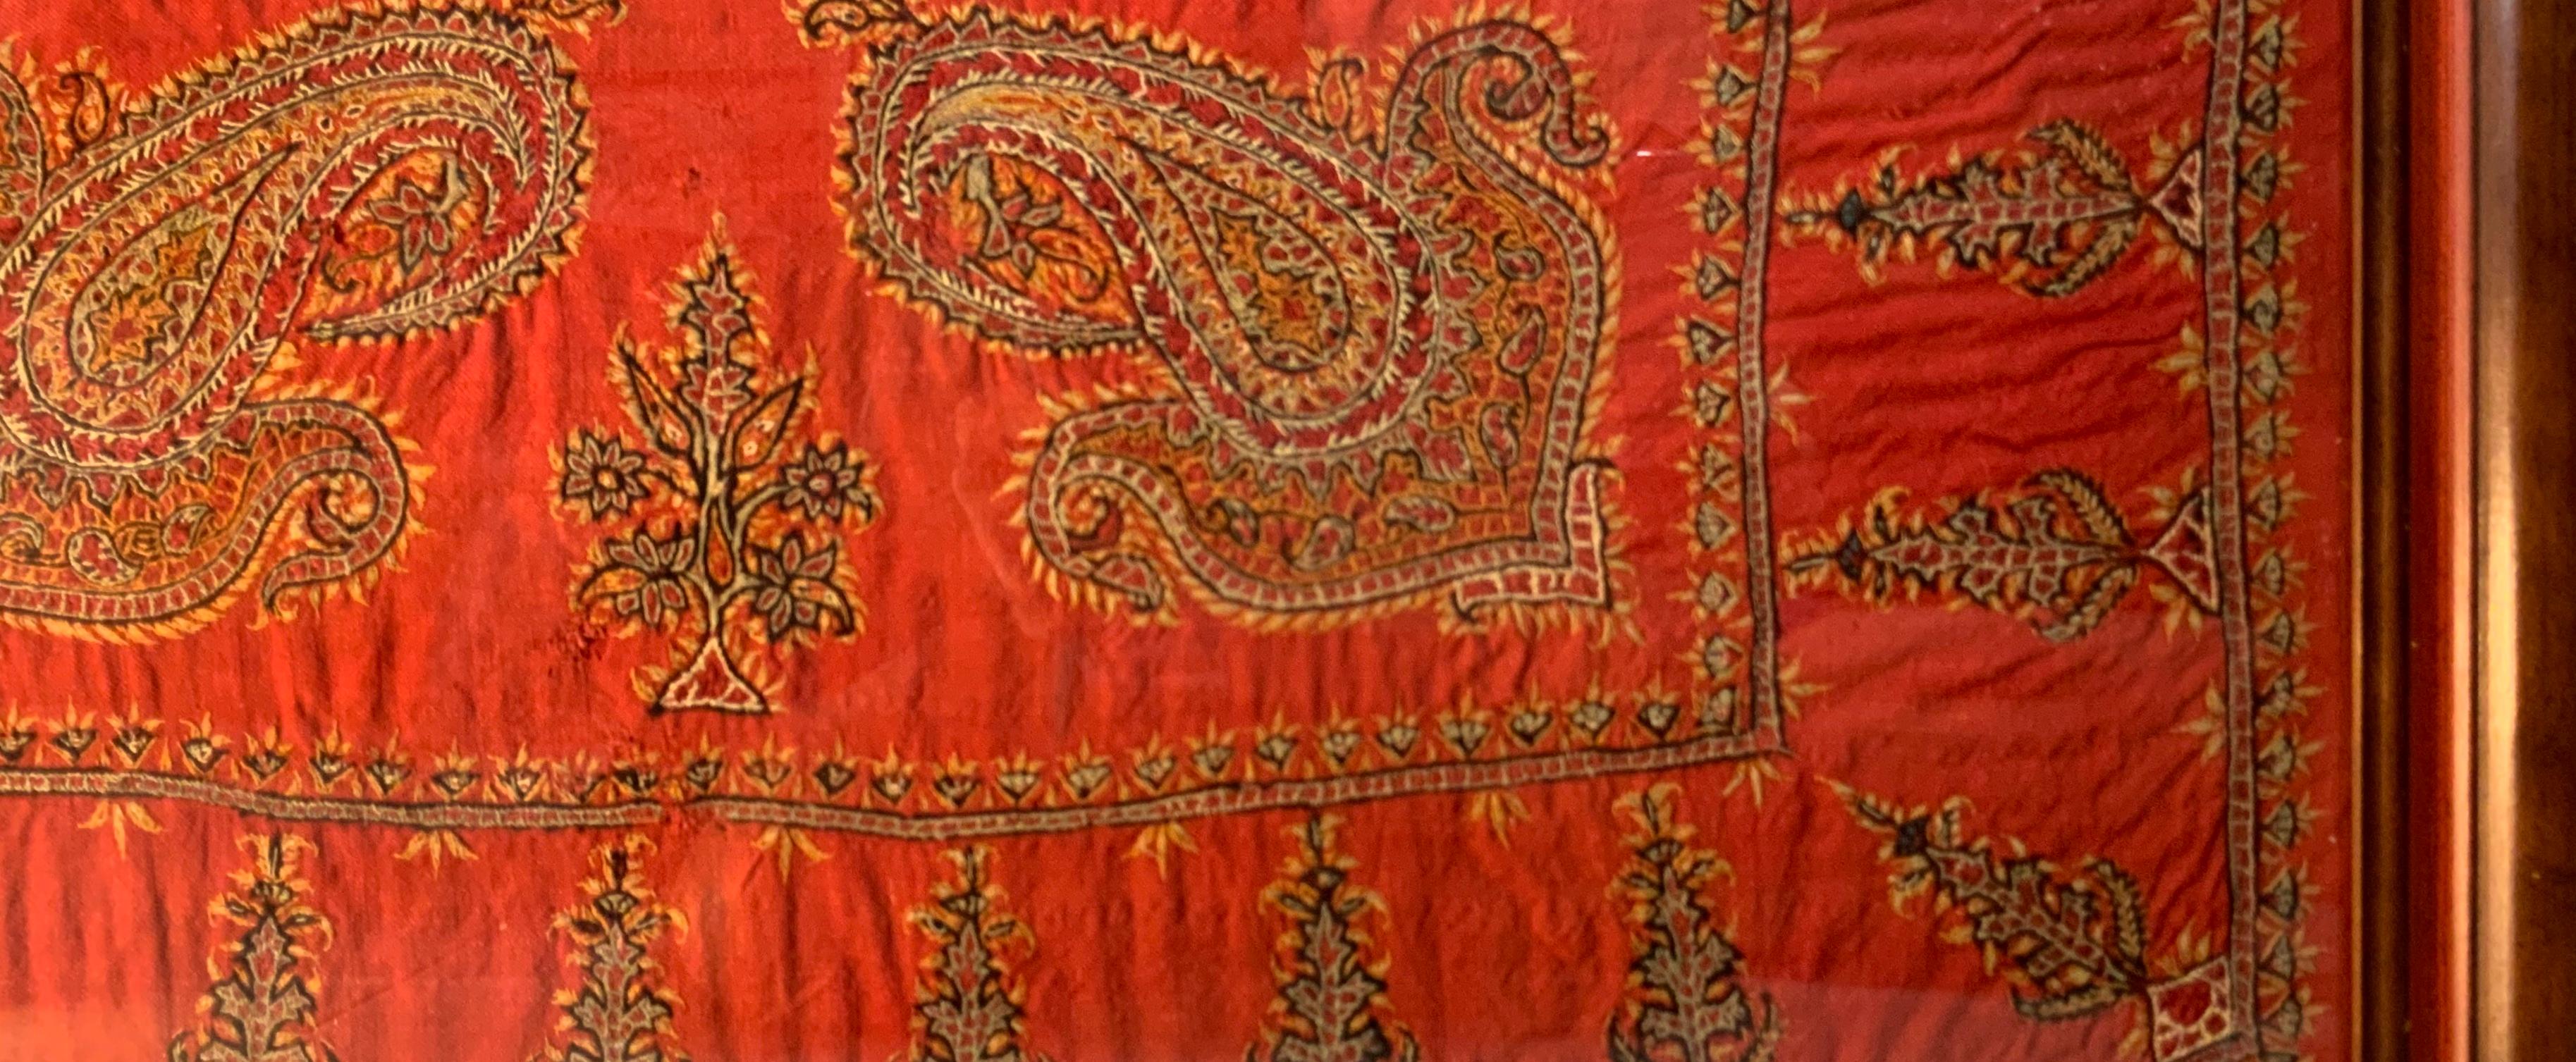 Early 20th Century Hand Embroidery Suzani Wall Hanging 7